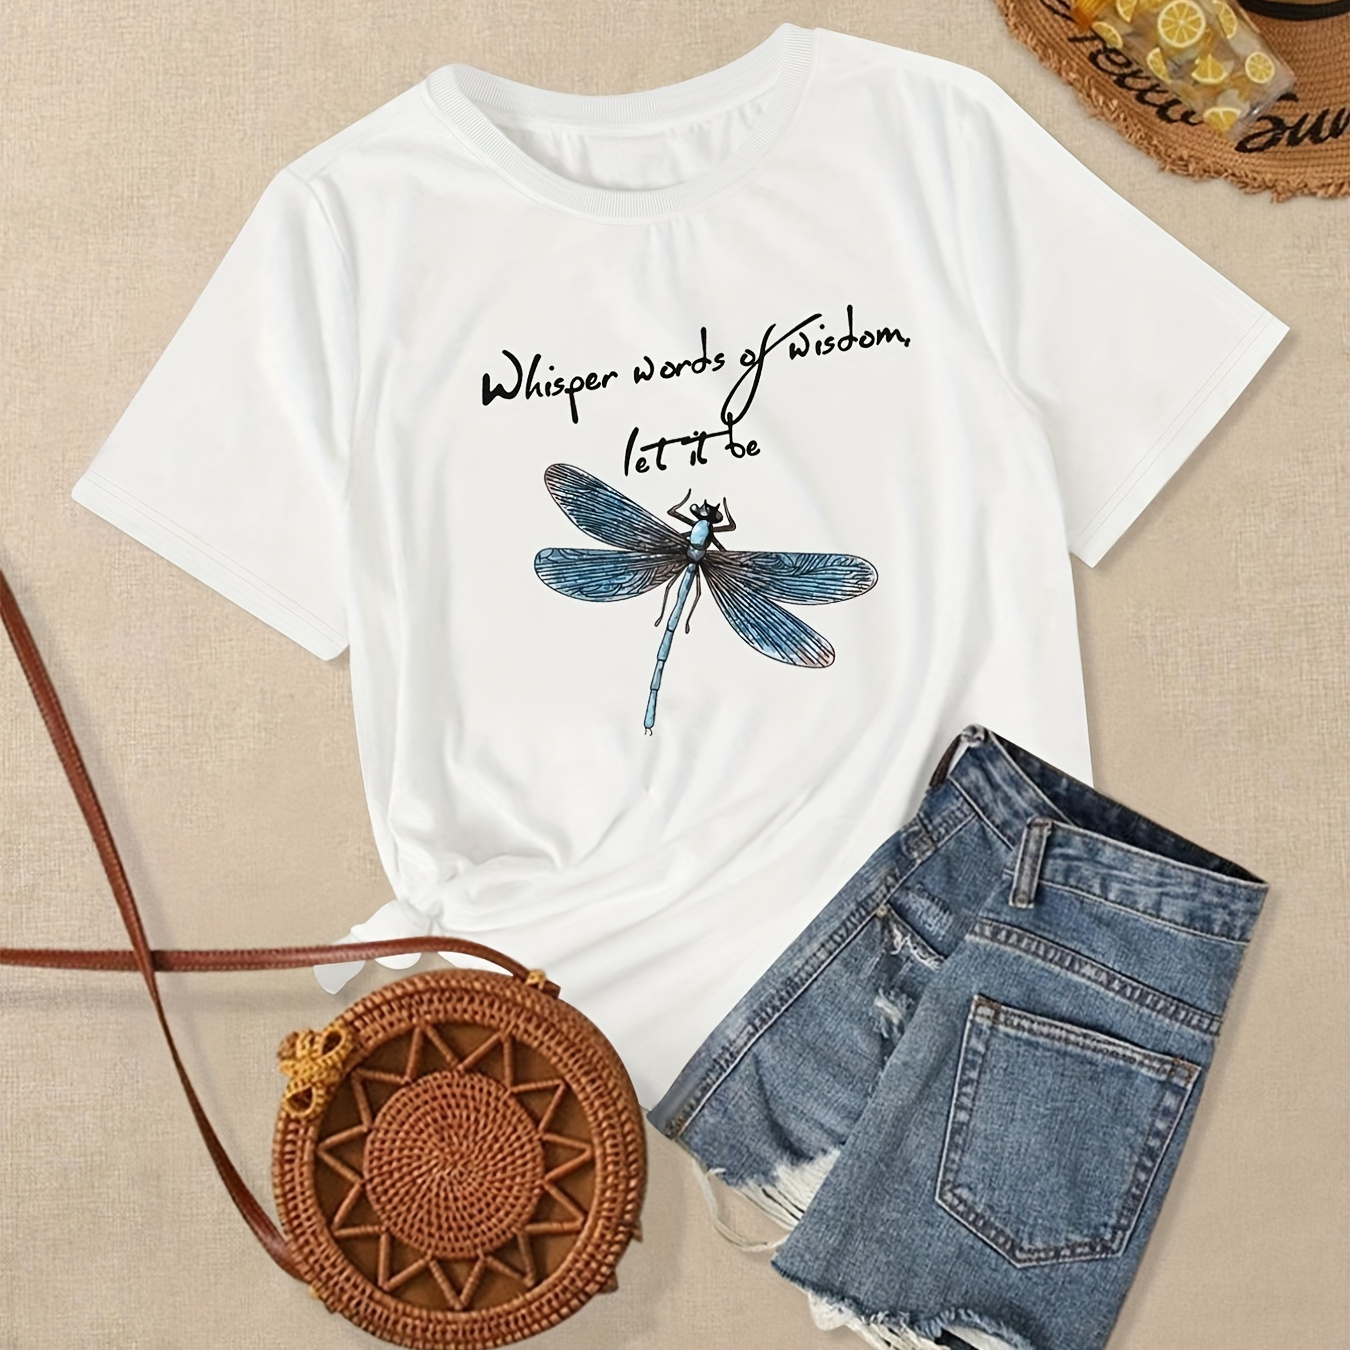 

Plus Size Dragonfly & Letter Print Short Sleeve T-shirt, Women's Plus Slight Stretch Round Neck Casual T-shirt